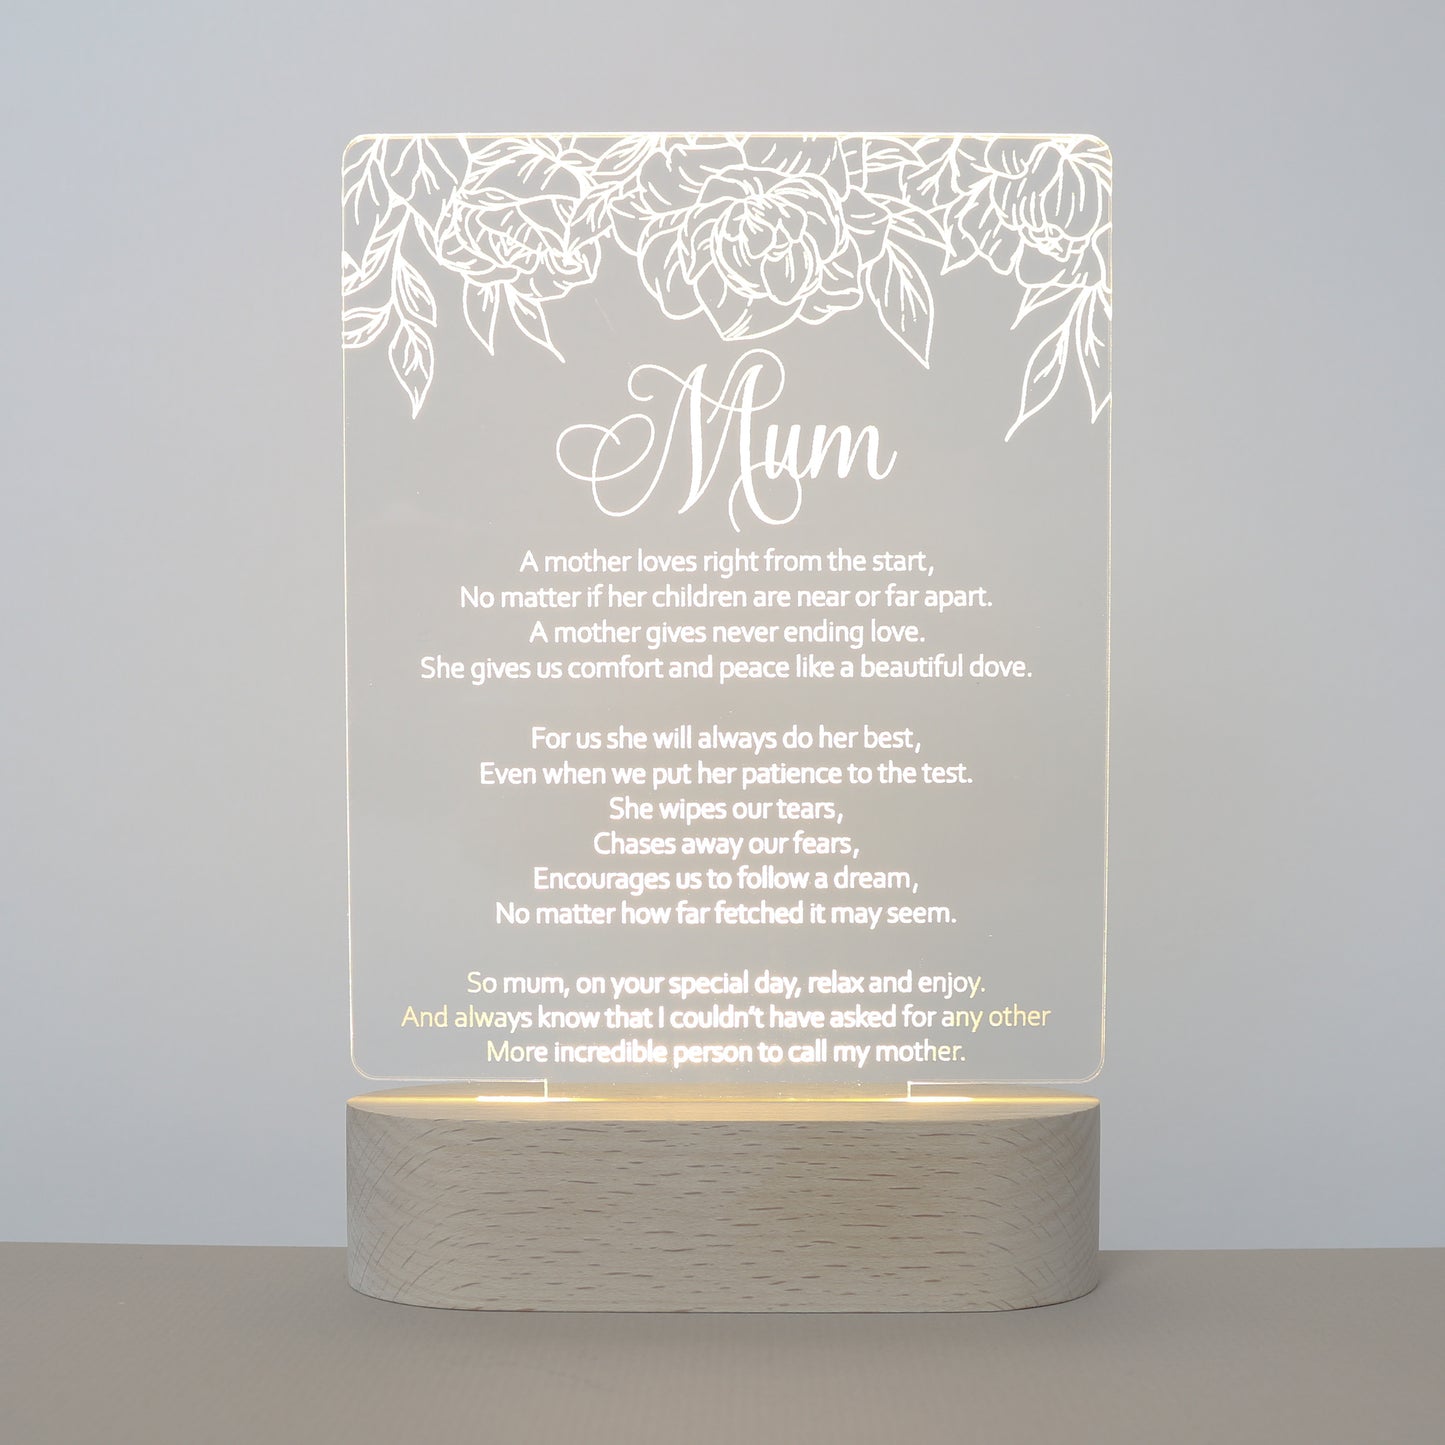 Mum Poem Lamp (A mother loves right from the start...)